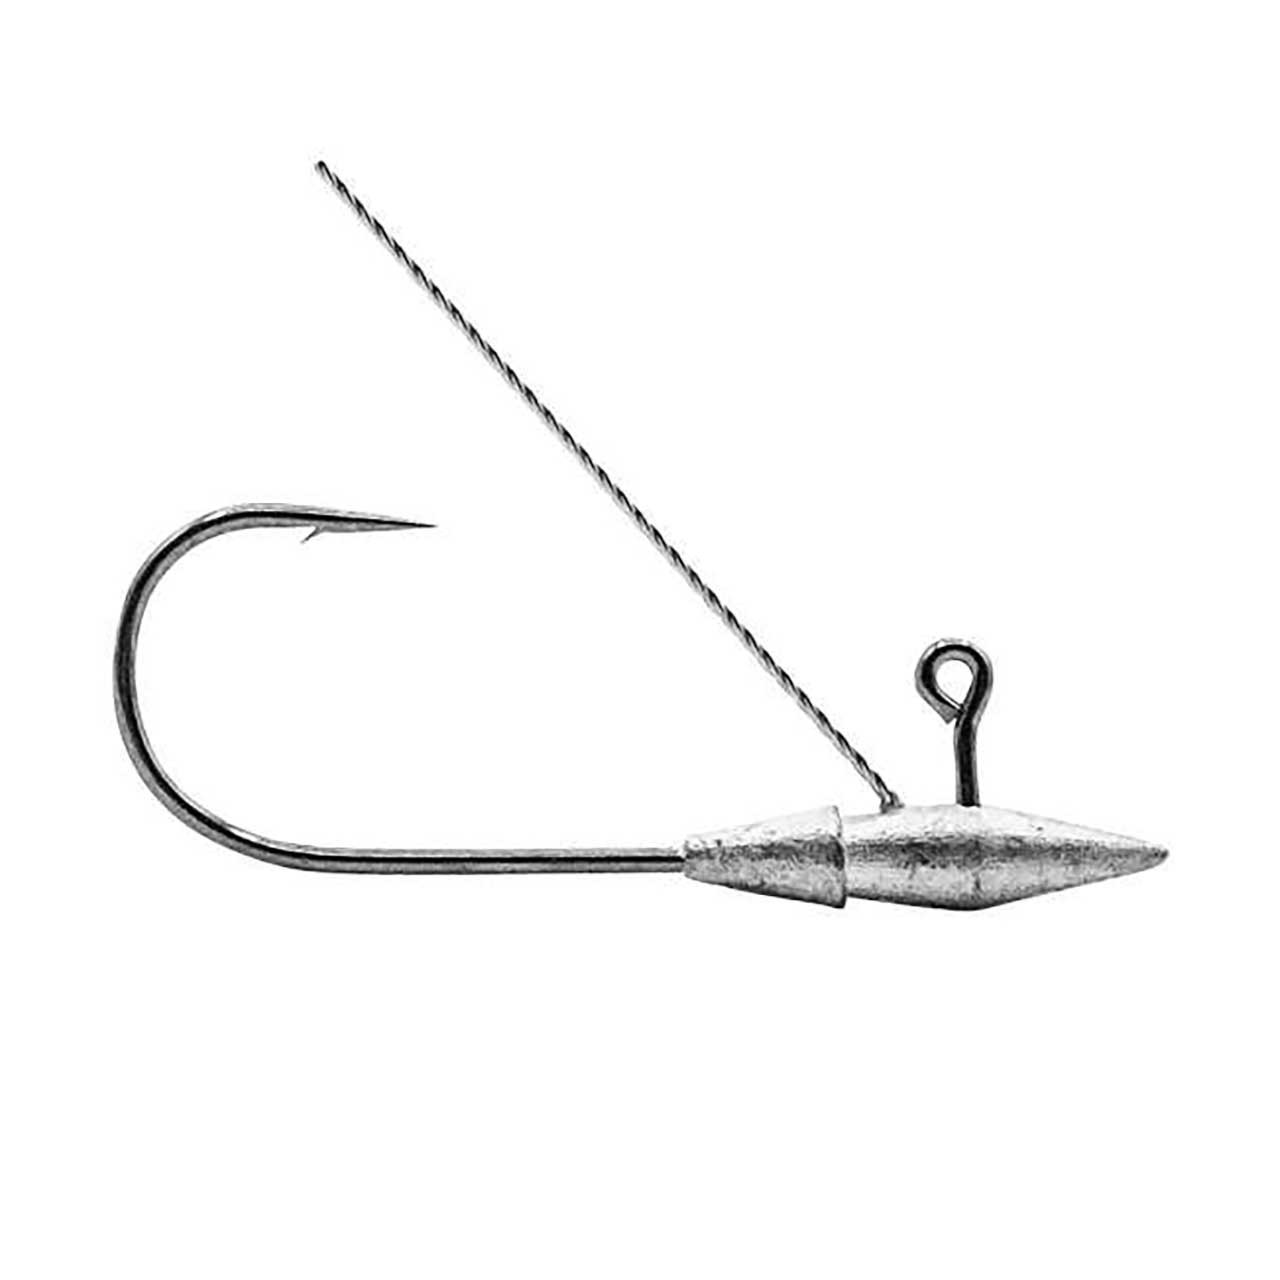 VMC 3/0 Flipping Hook With Weedguard And Keeper